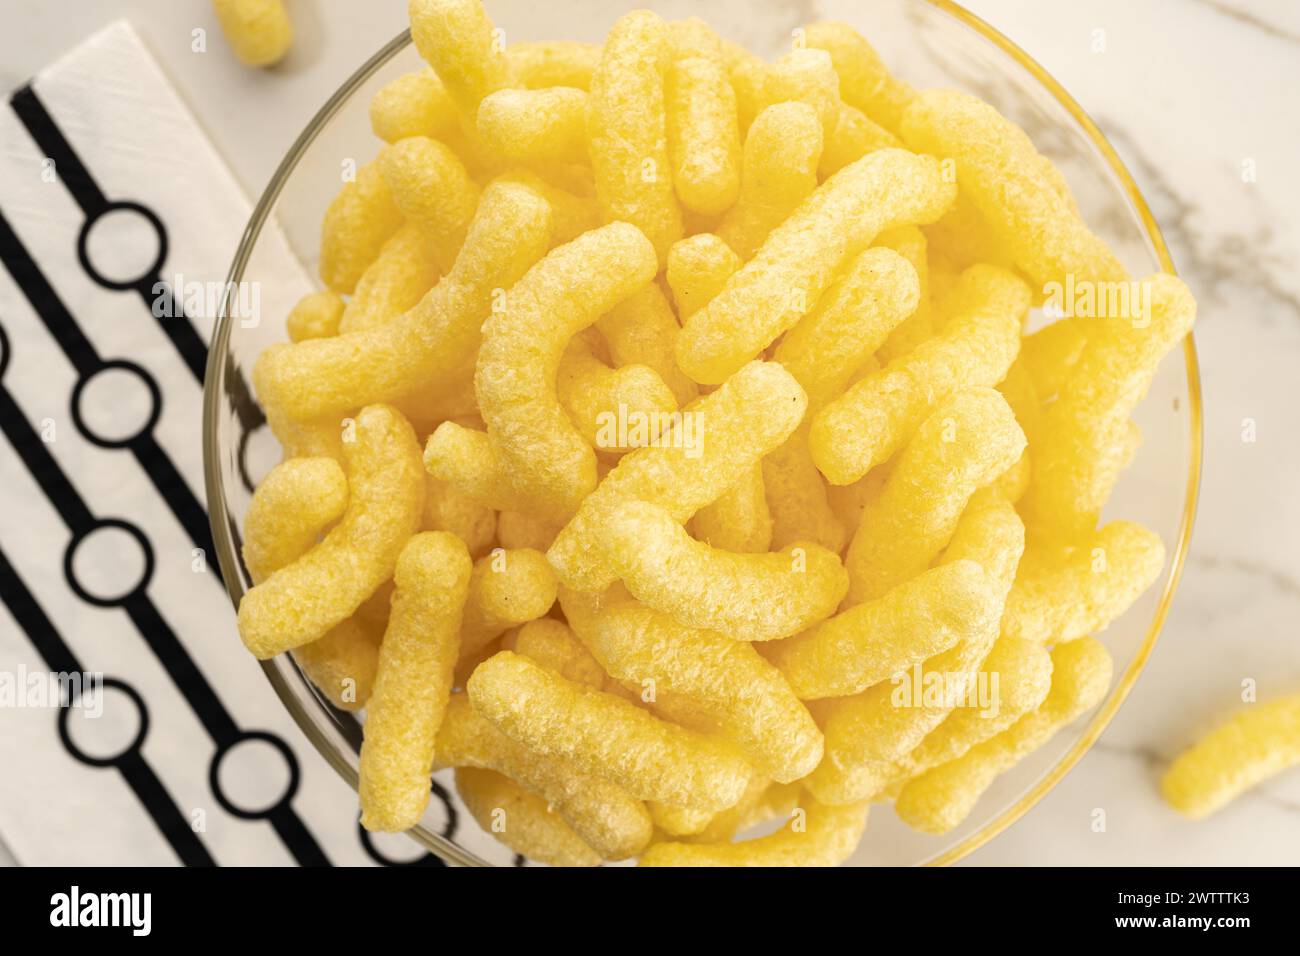 Corn sticks in bowl on table still life. Top view Stock Photo